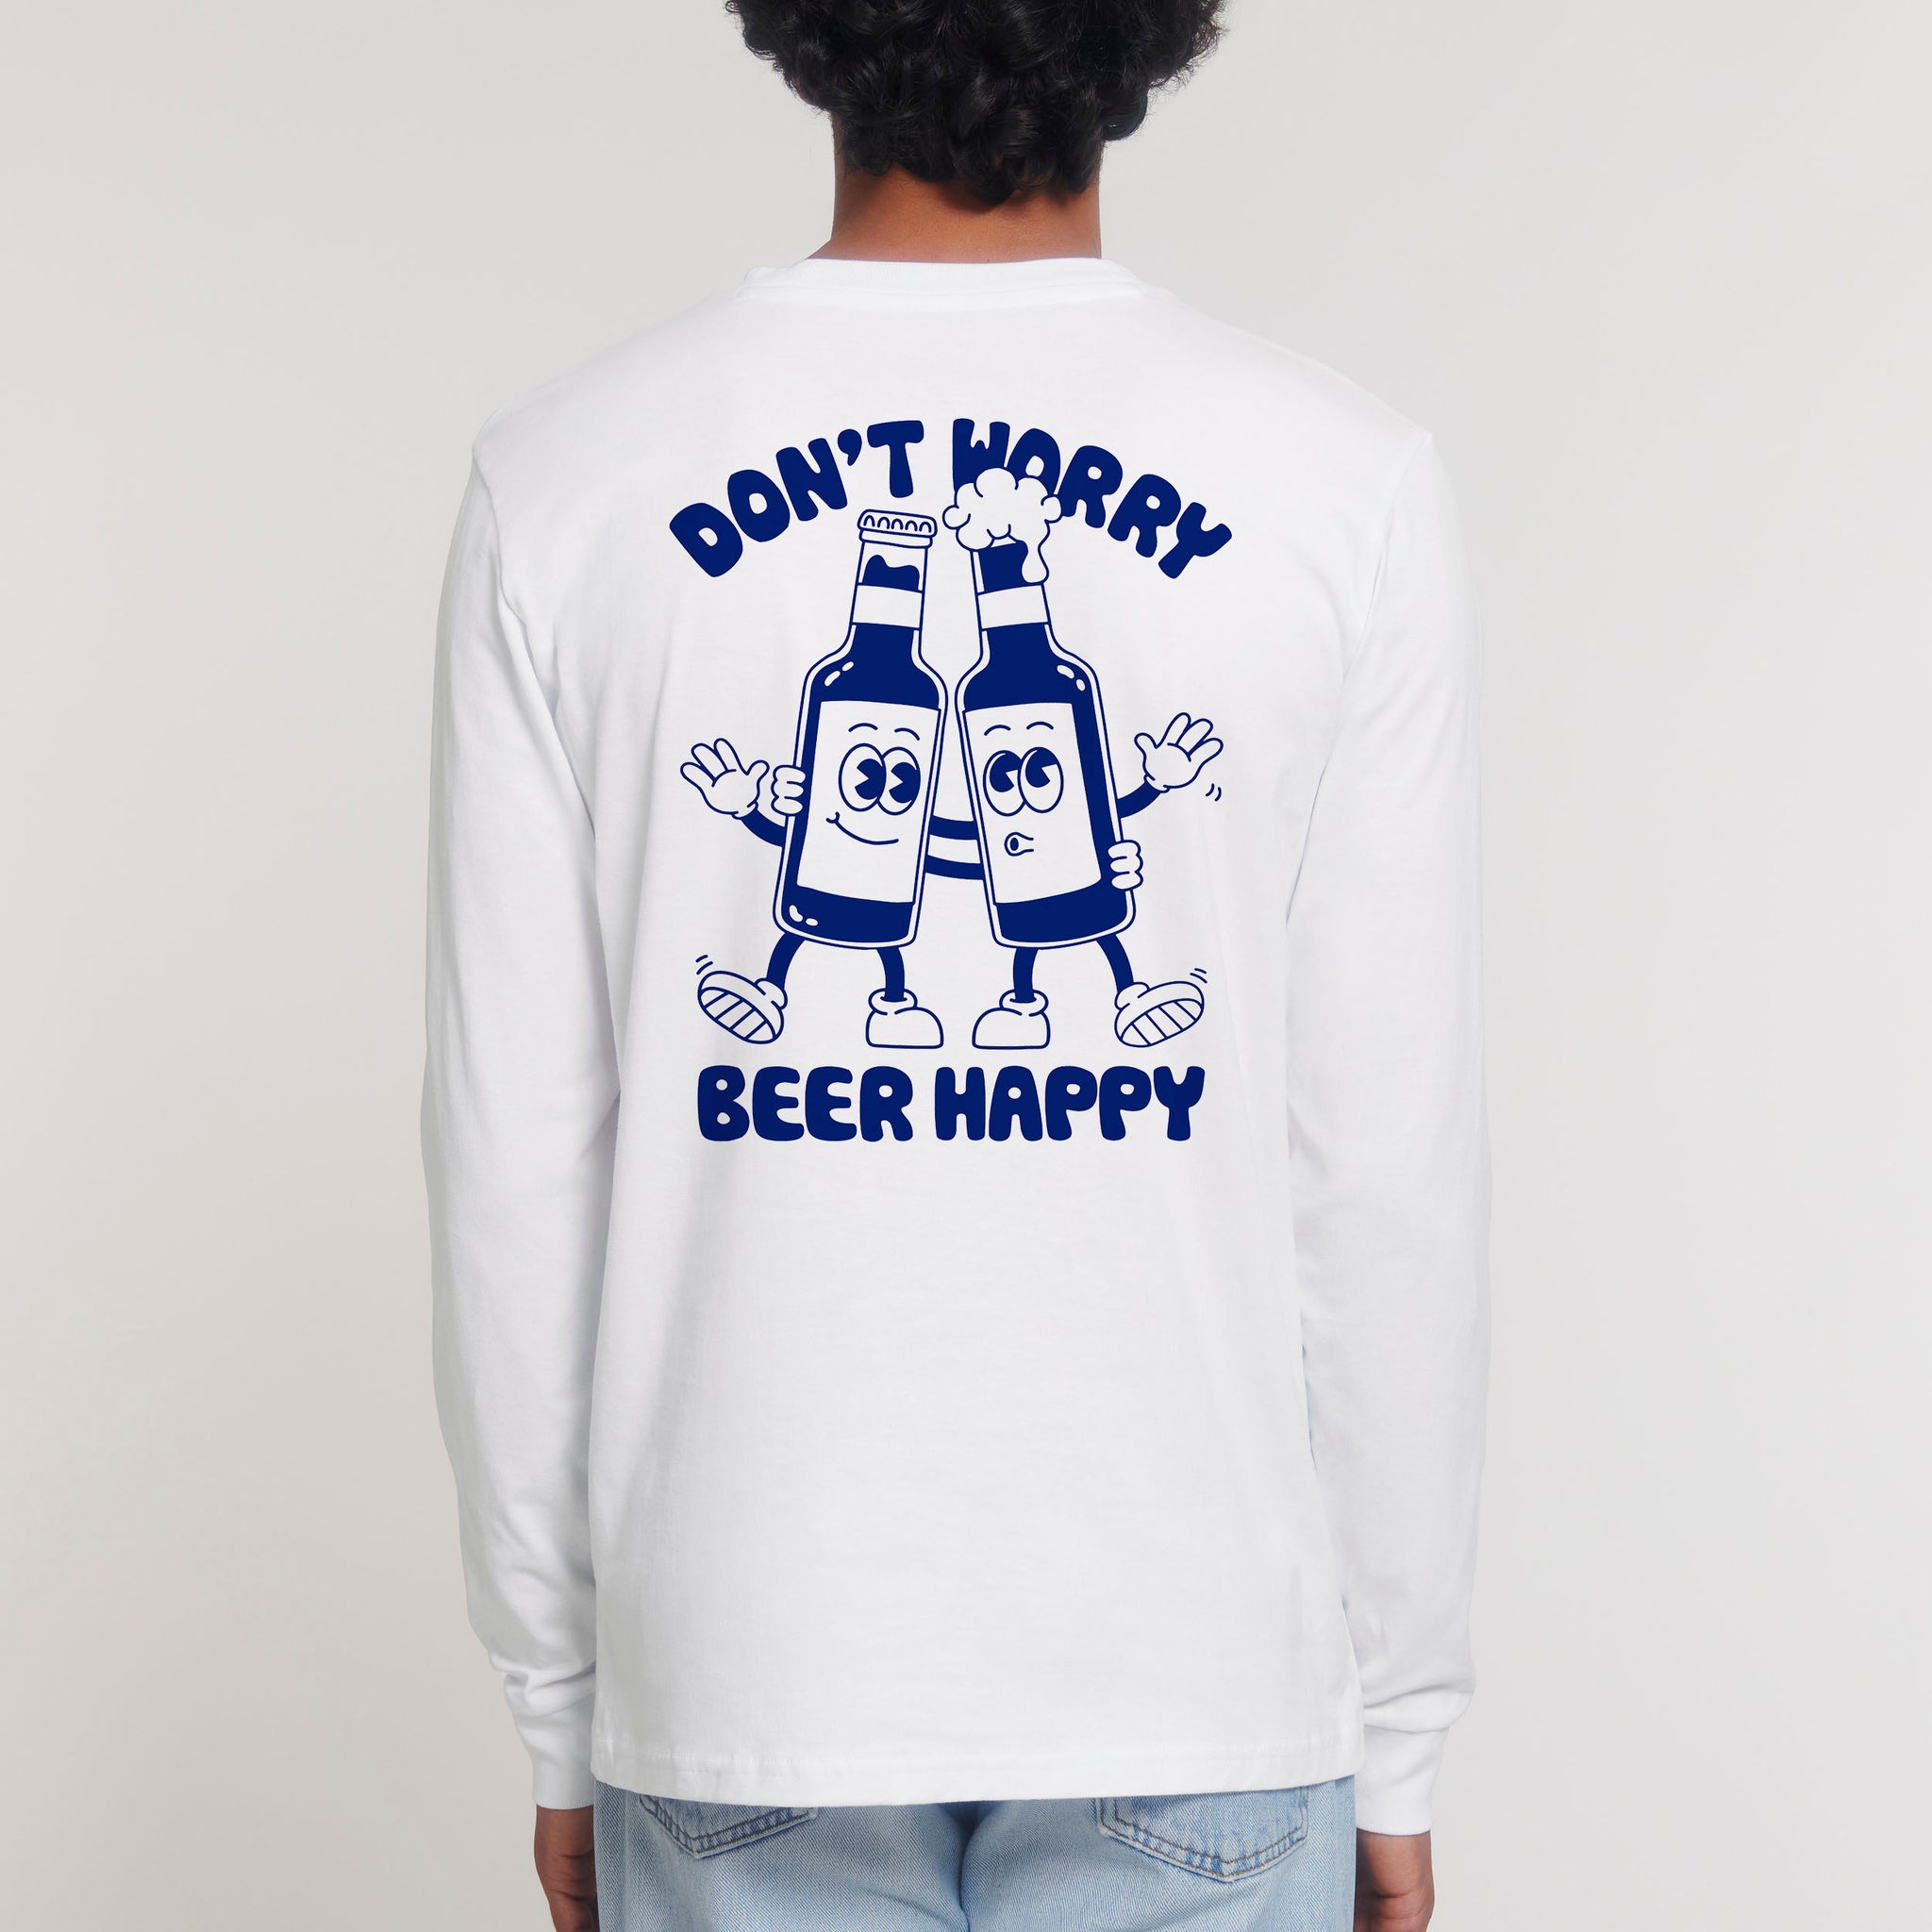 'Don't Worry Beer Happy' long sleeve T-shirt